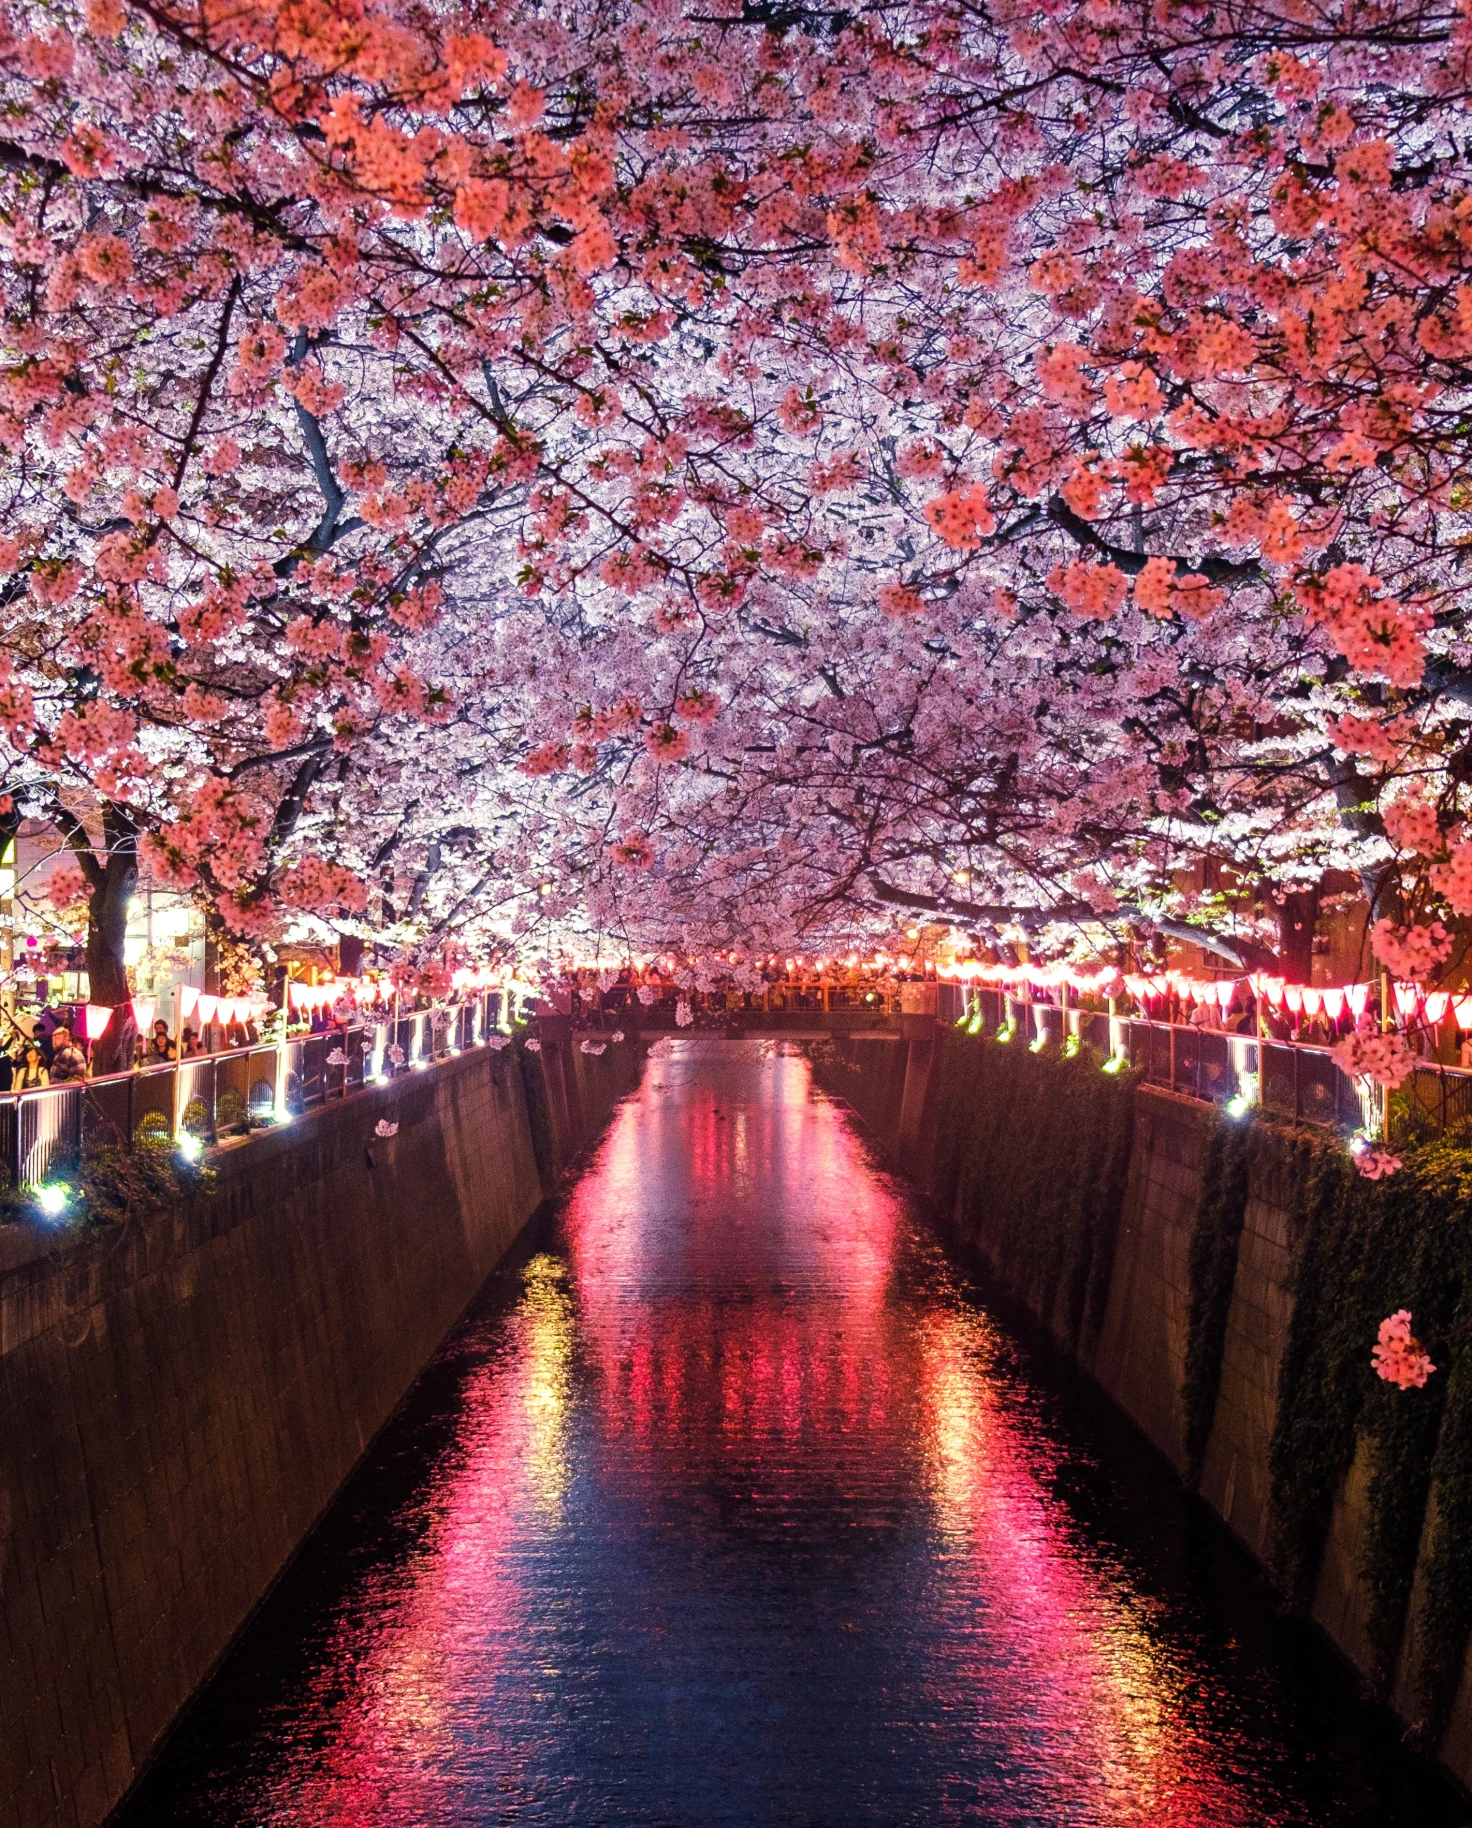 A canal between cherry blossom trees.